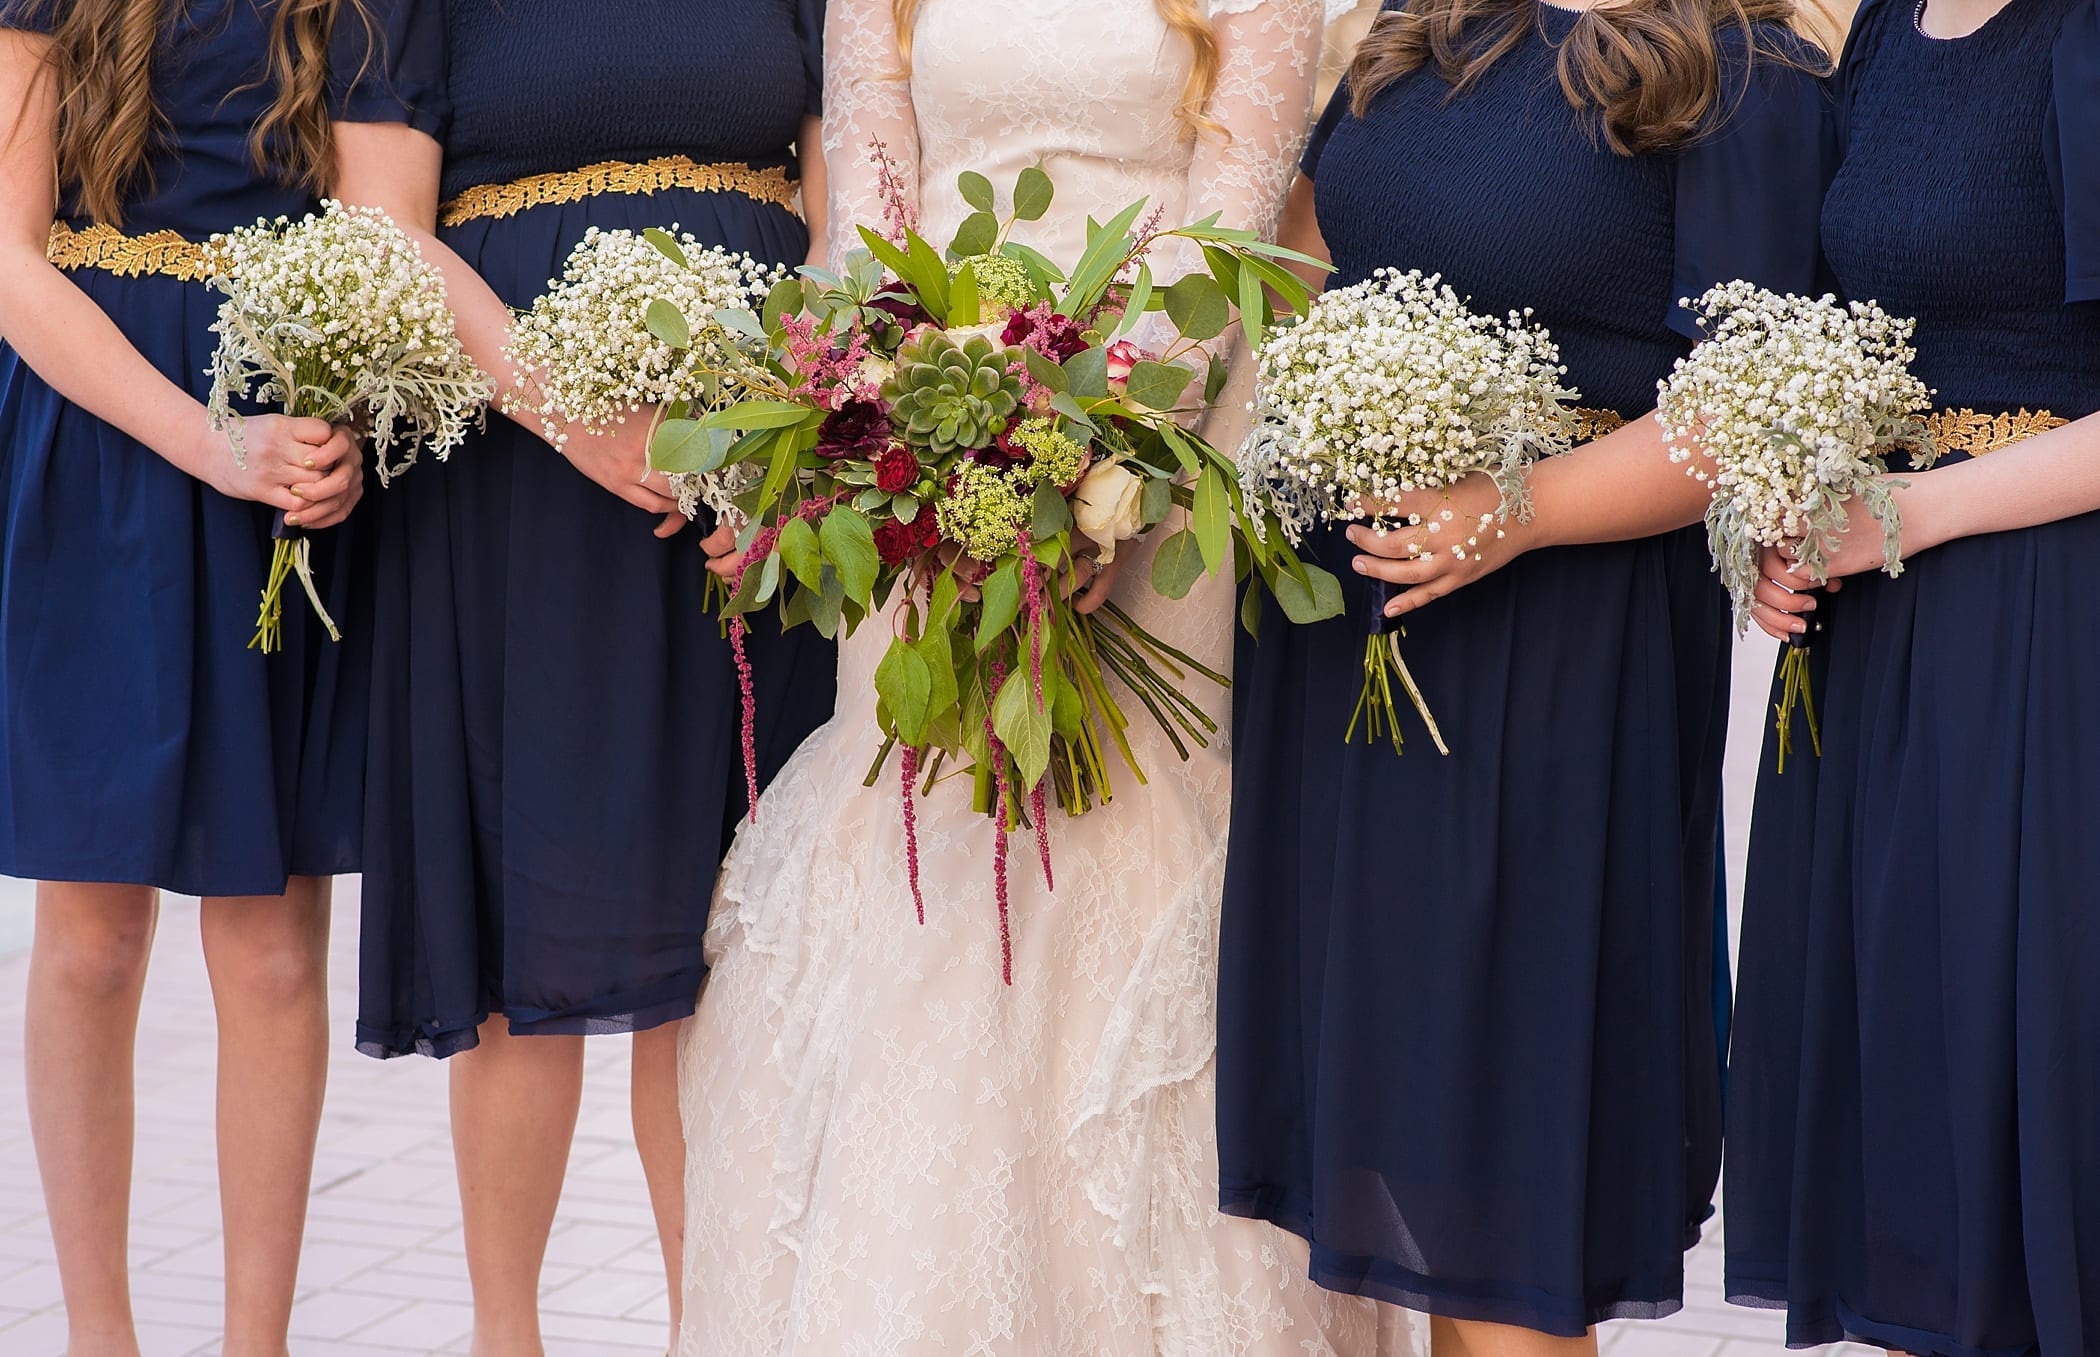 2016 wedding trend bouquets- loose and flowy photographed by MIchelle & Logan_0001